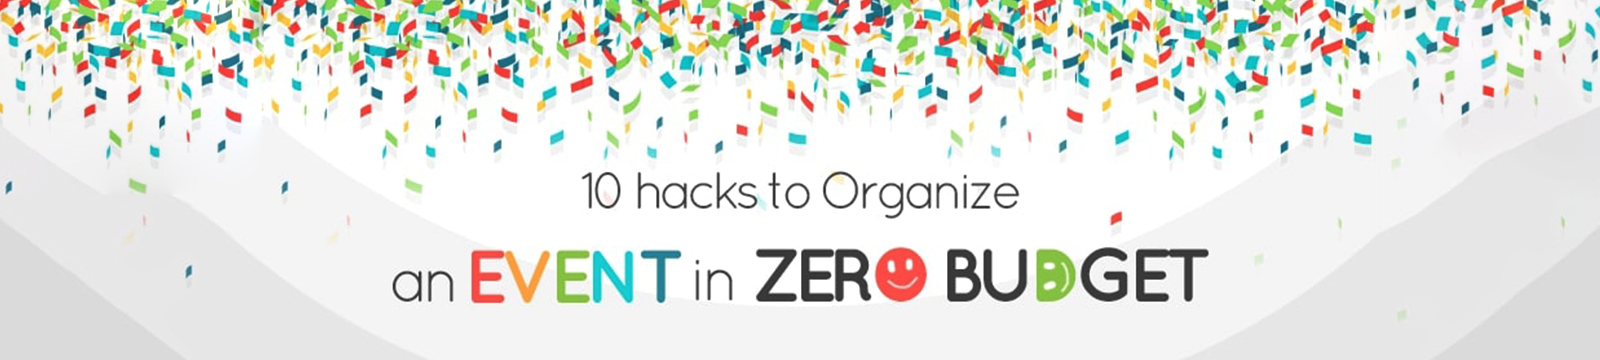 10 Hacks to Organize an Event in ZERO budget